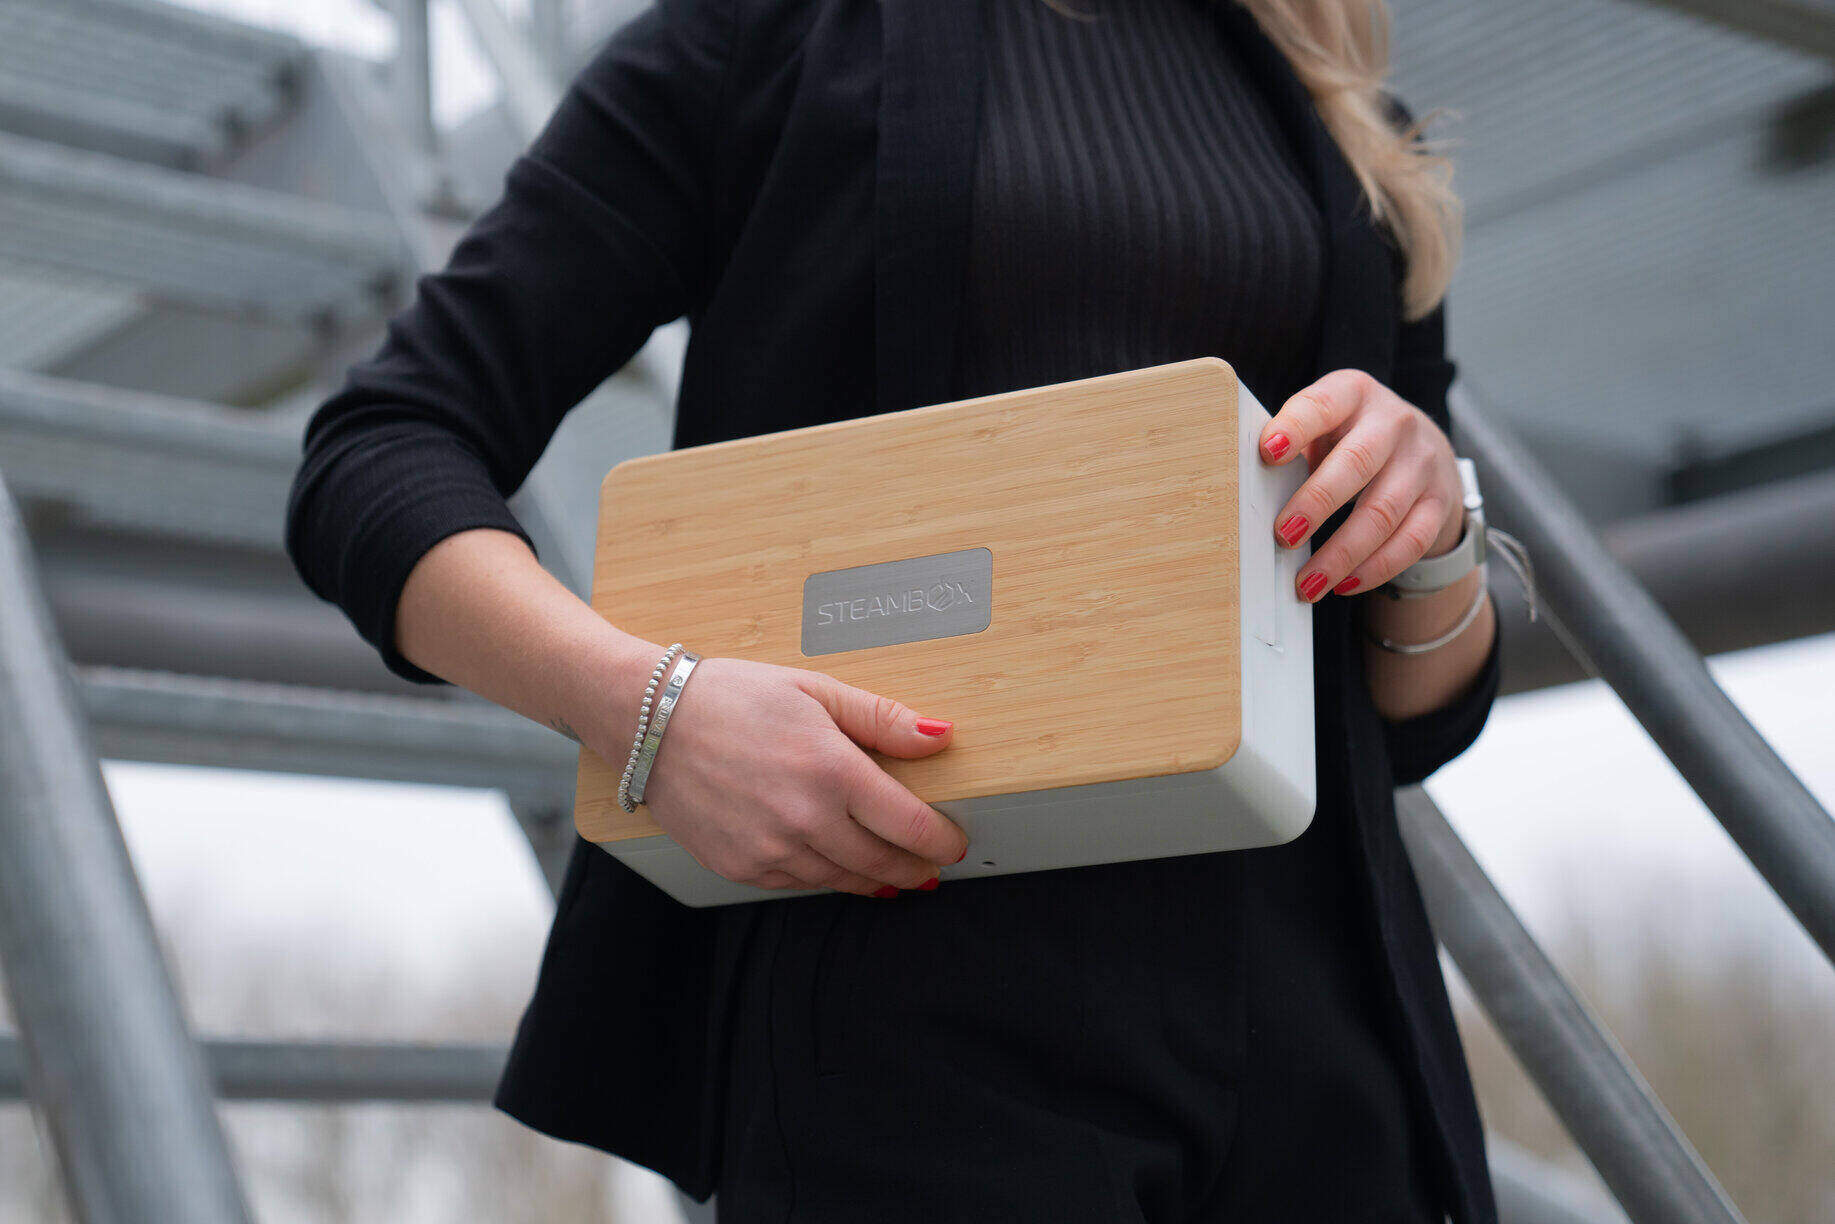 Steambox: the self-heating lunch box